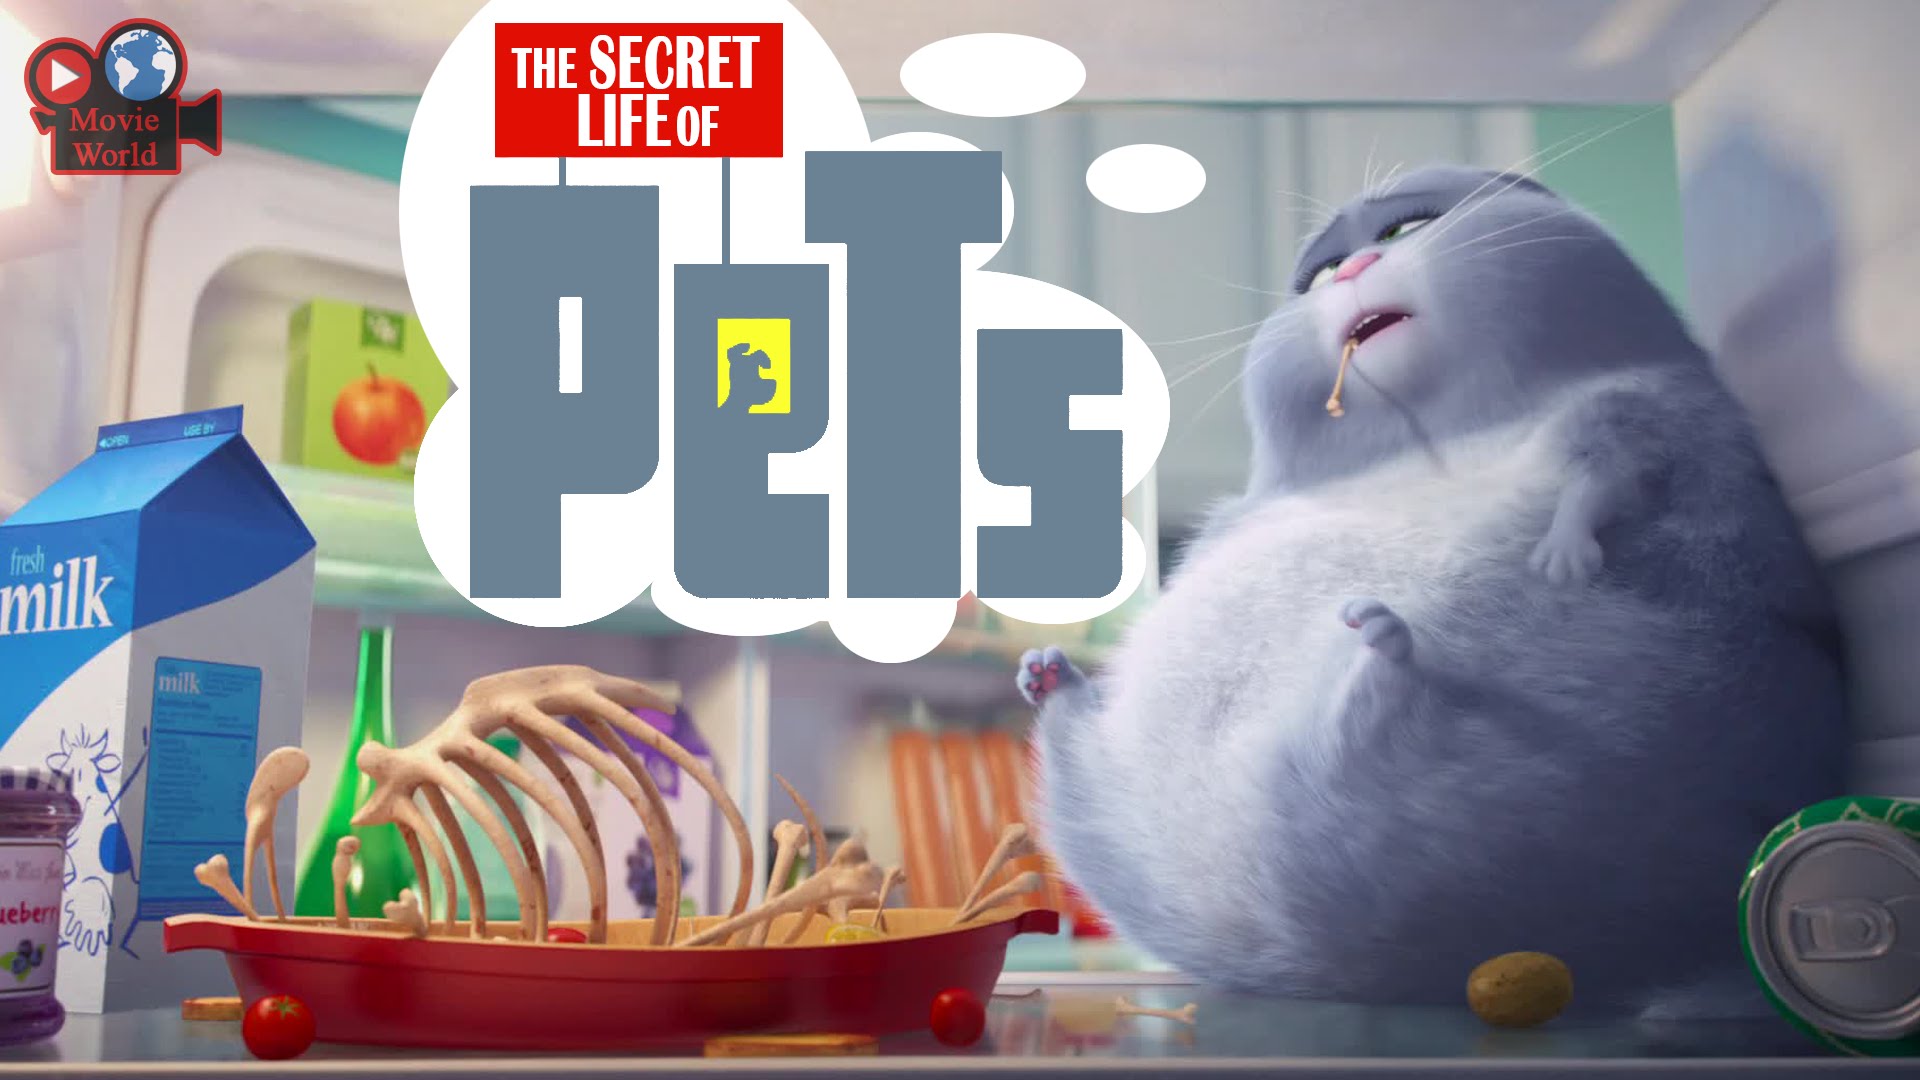 The Secret Life of Pets Wallpaper   HD Wallpapers Backgrounds of Your 1920x1080